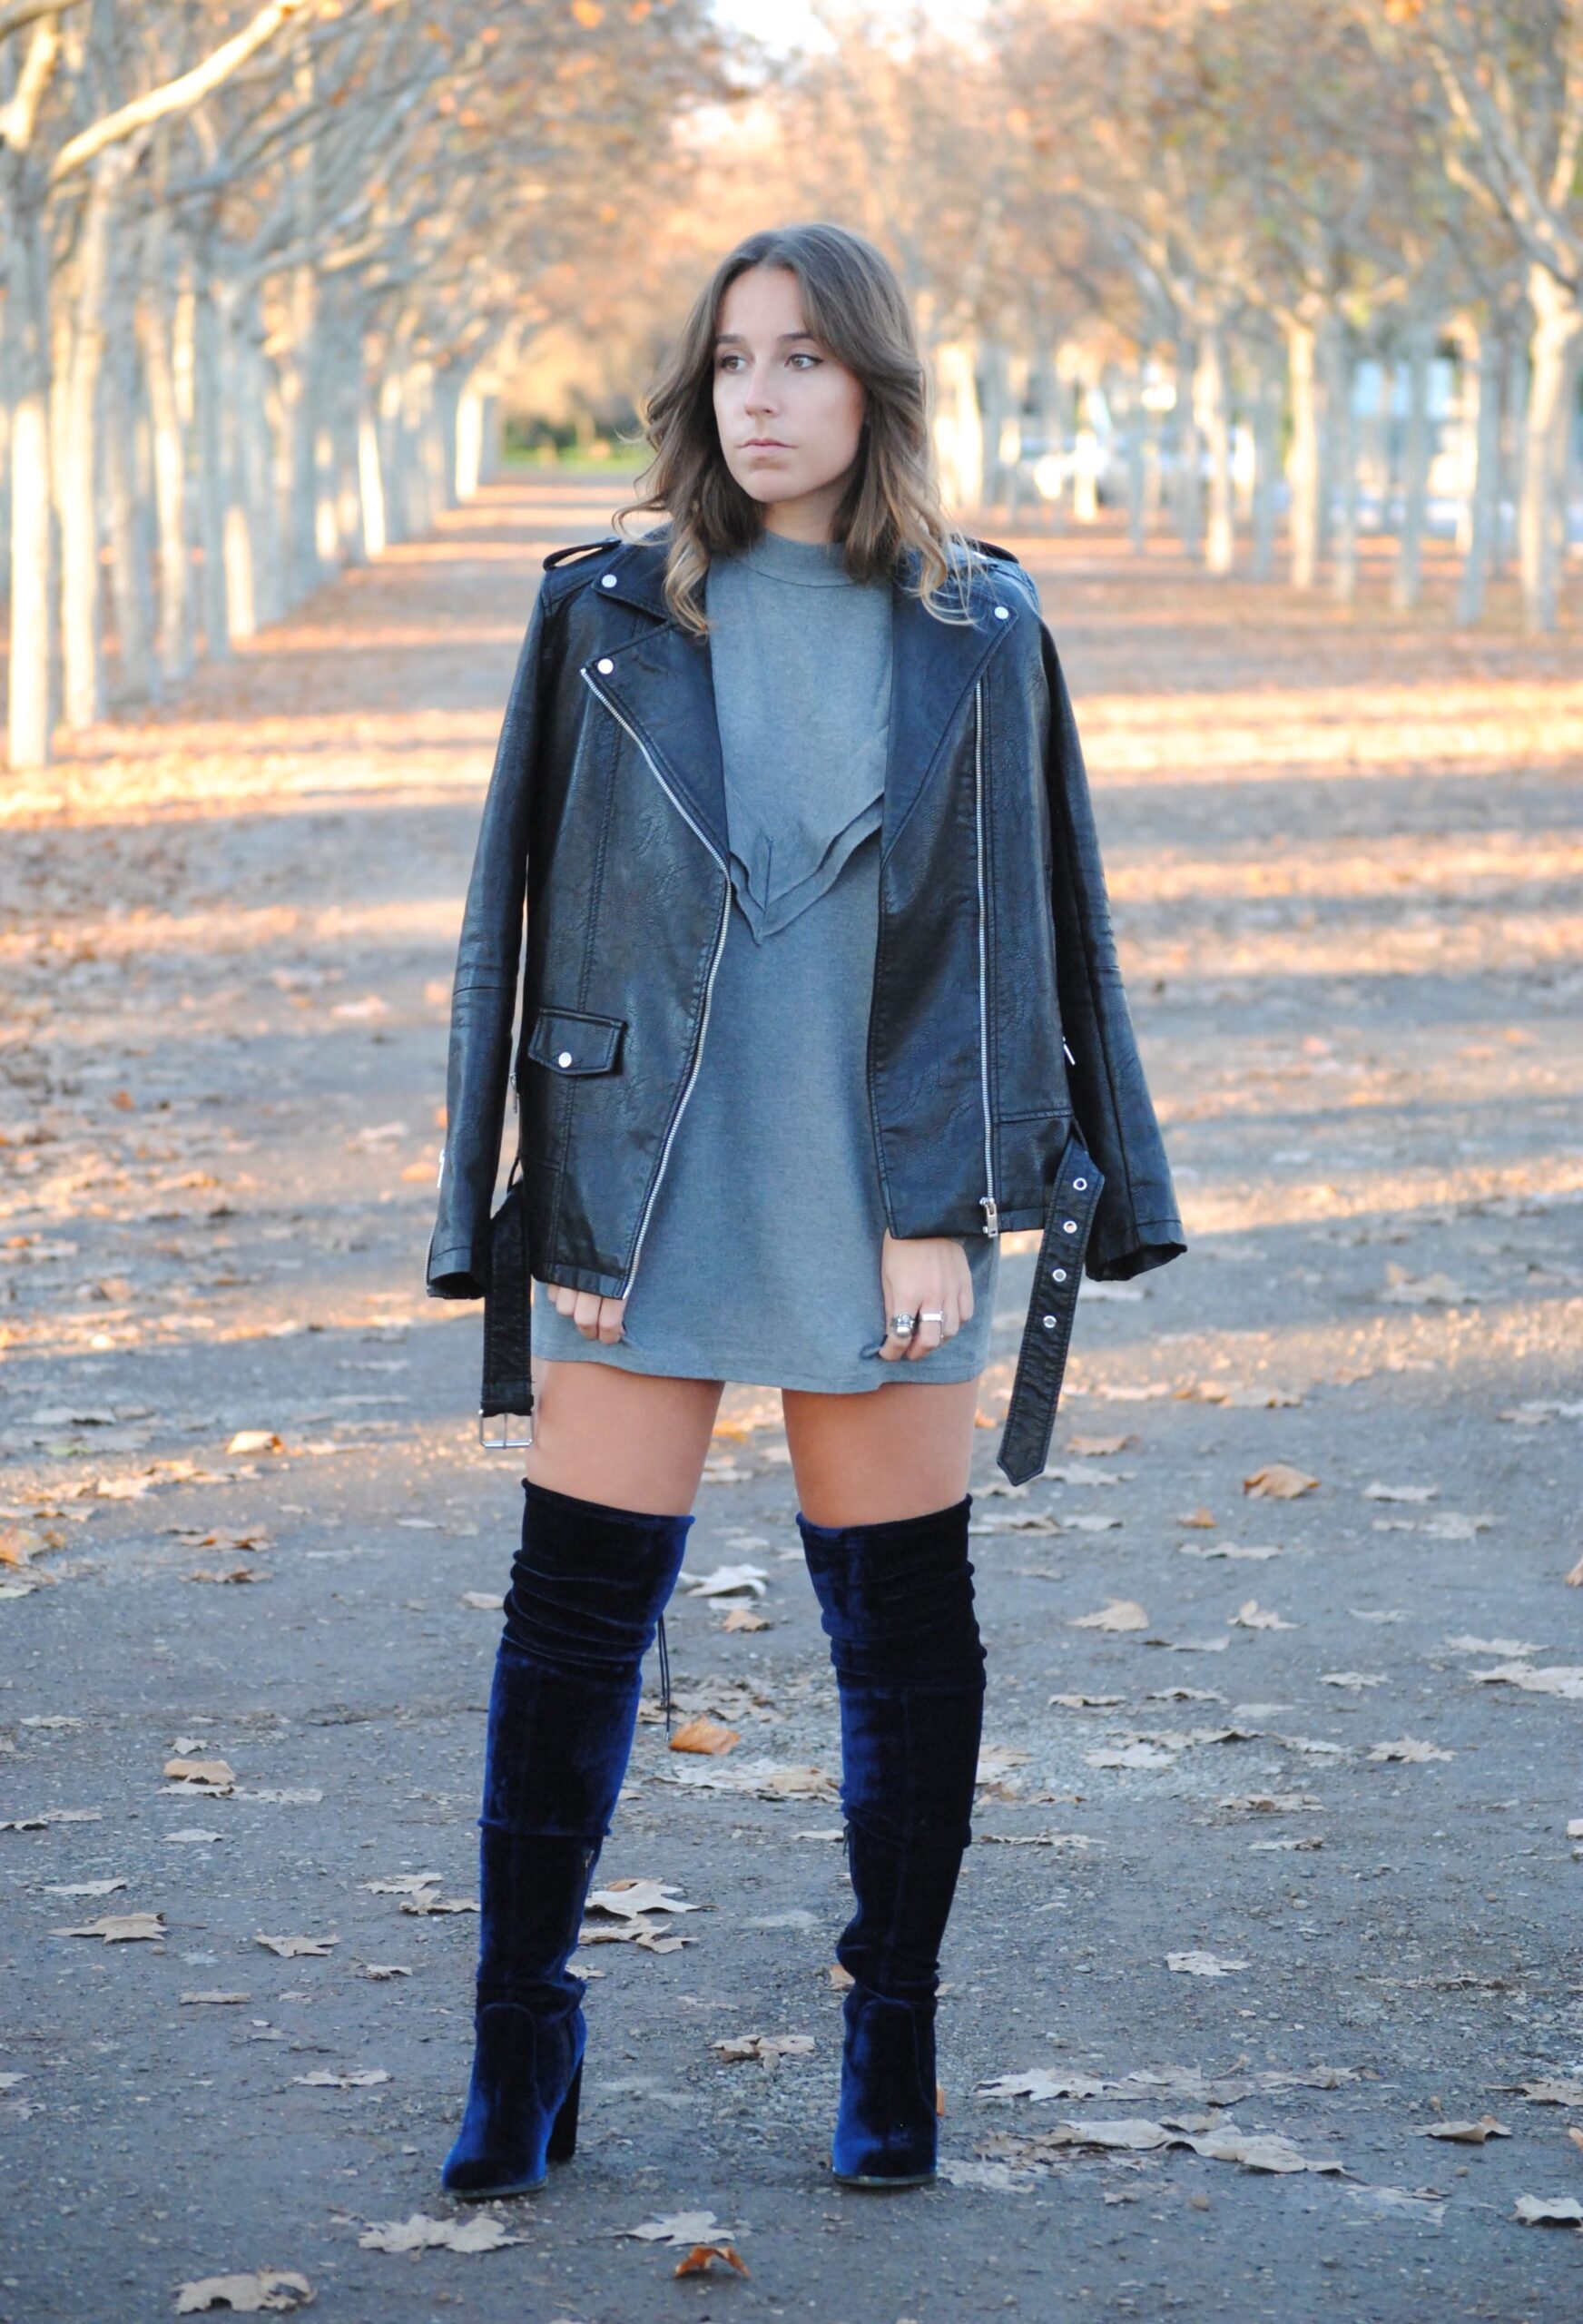 Velvet Knee Boots Outfit Ideas